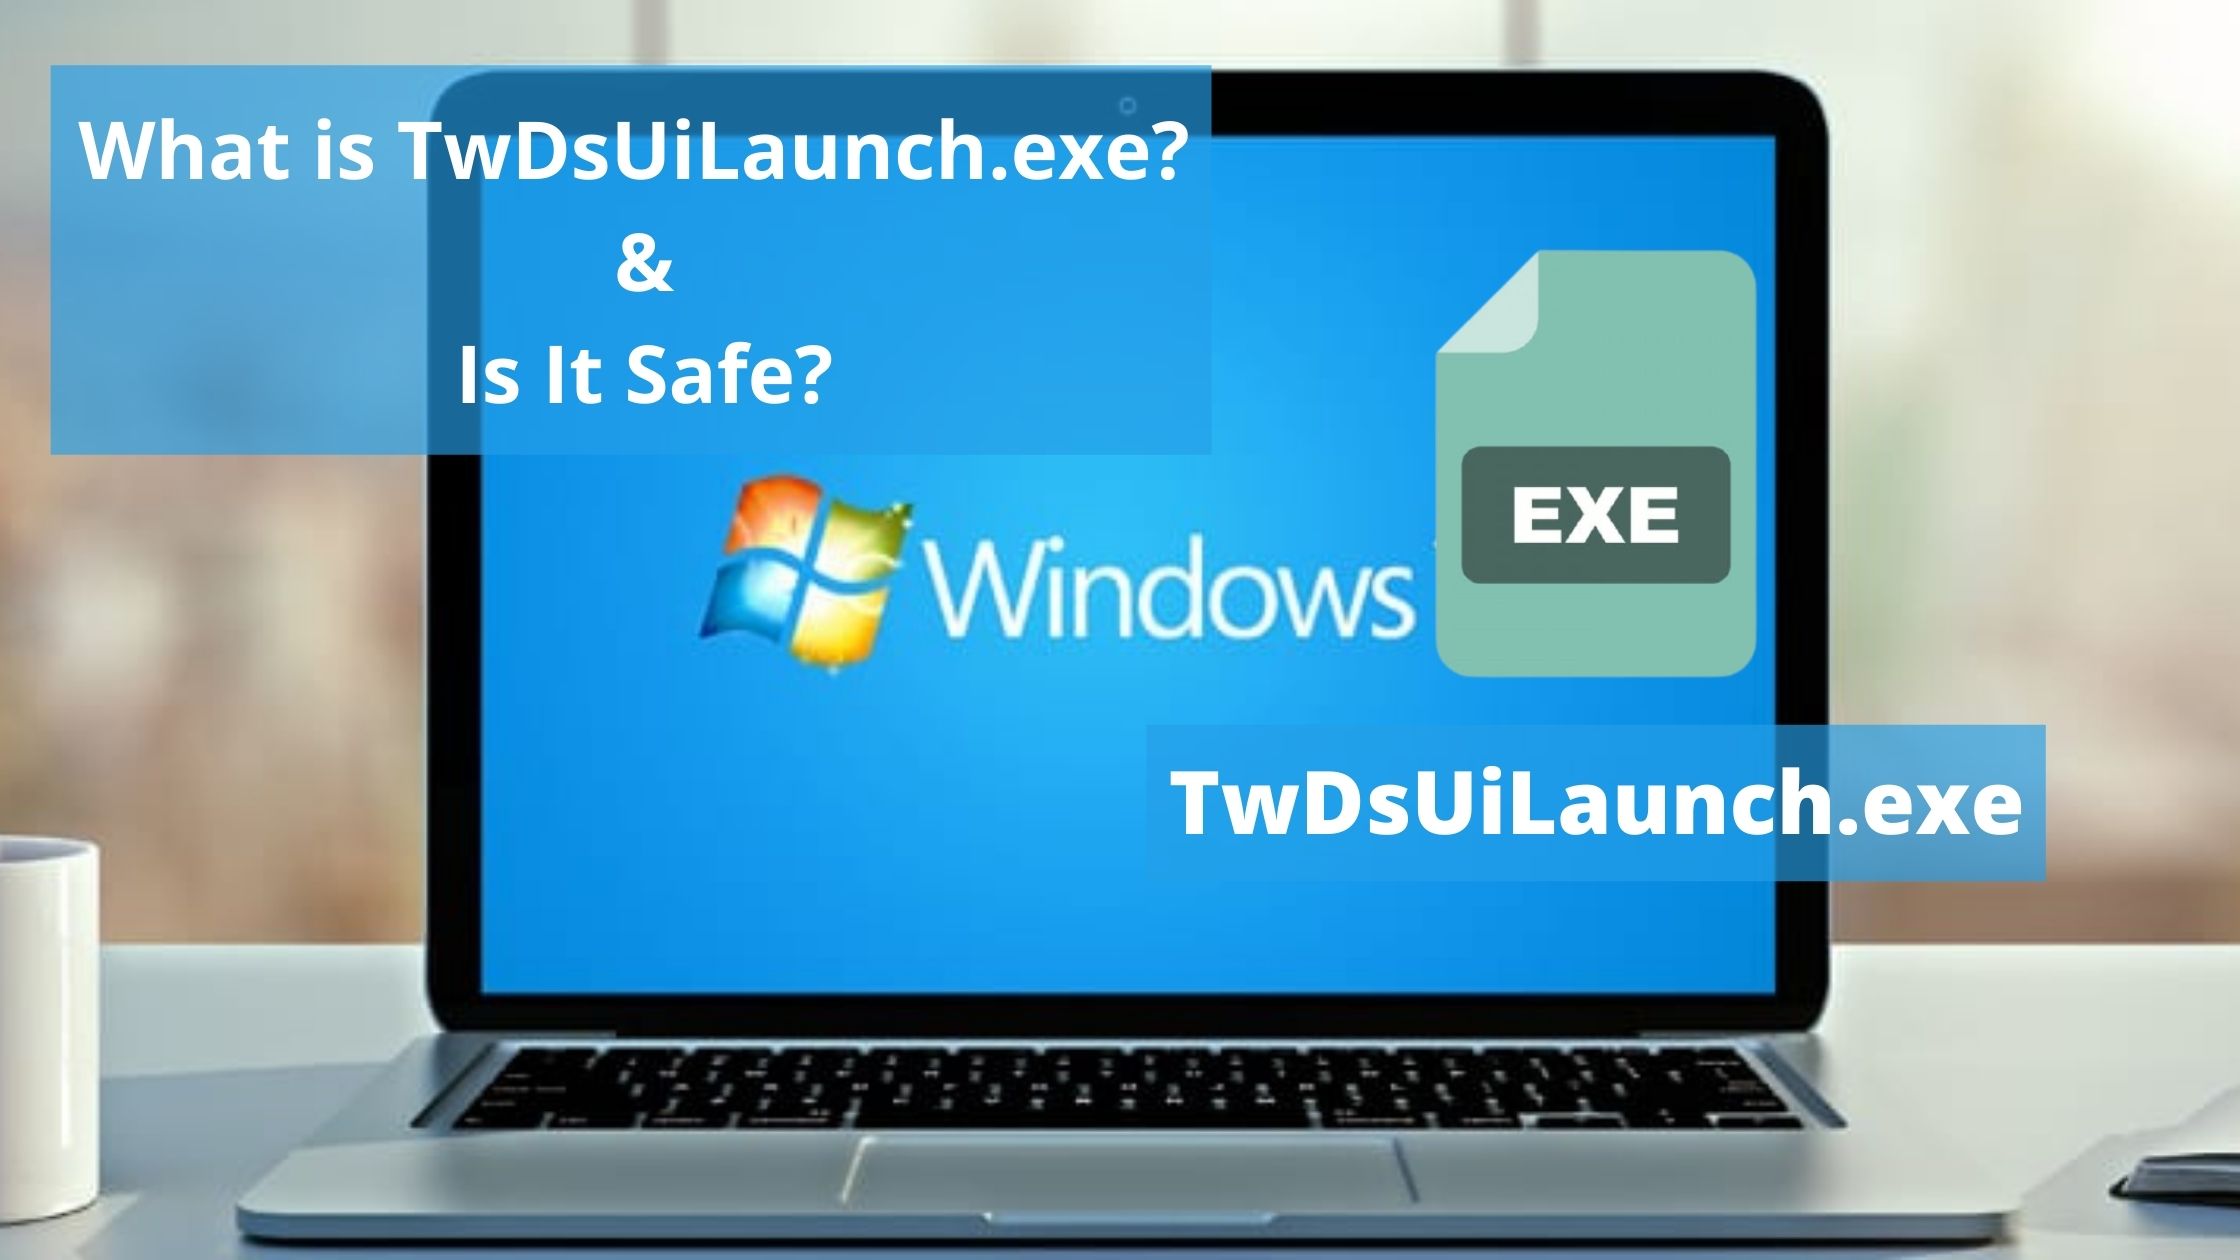 TwDsUiLaunch.exe